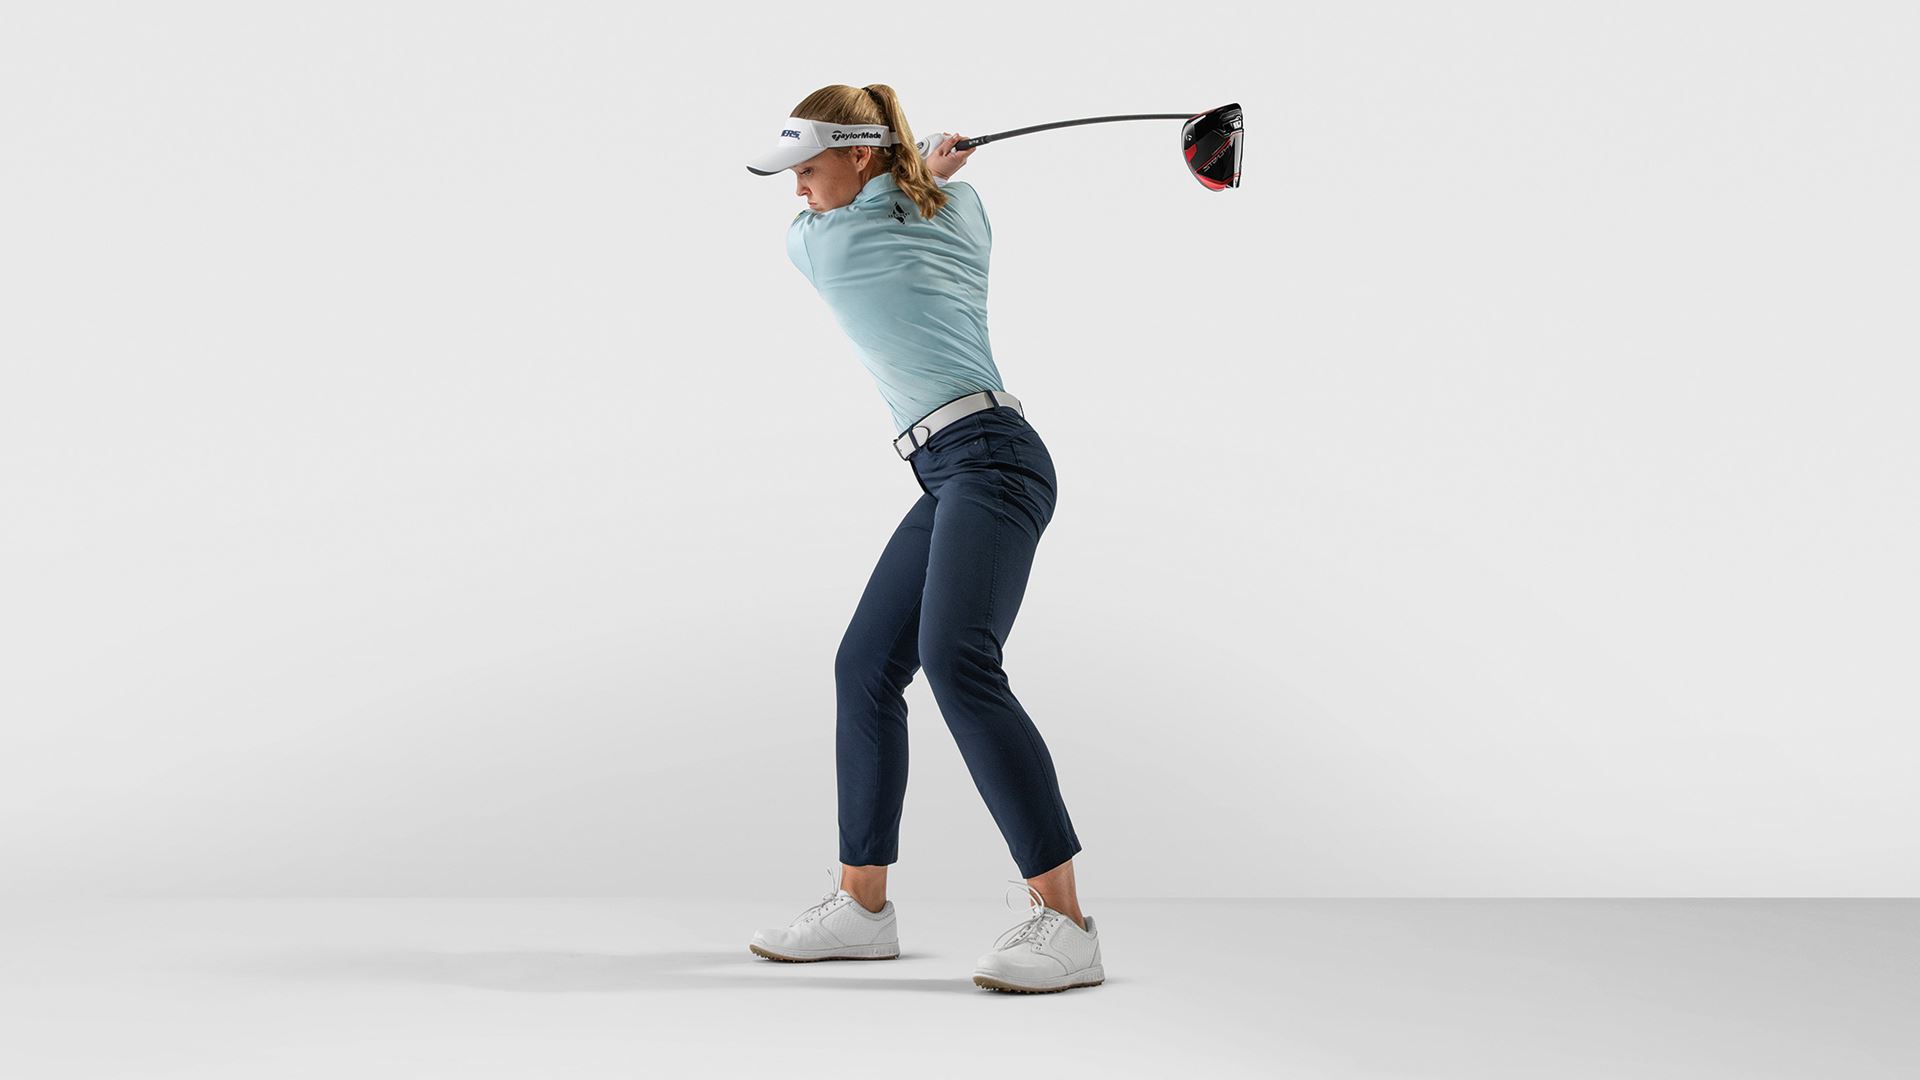 TaylorMade Golf Expands Contract of LPGA Tour Star Brooke Henderson to Include Full Bag, Headwear and Staff Bag